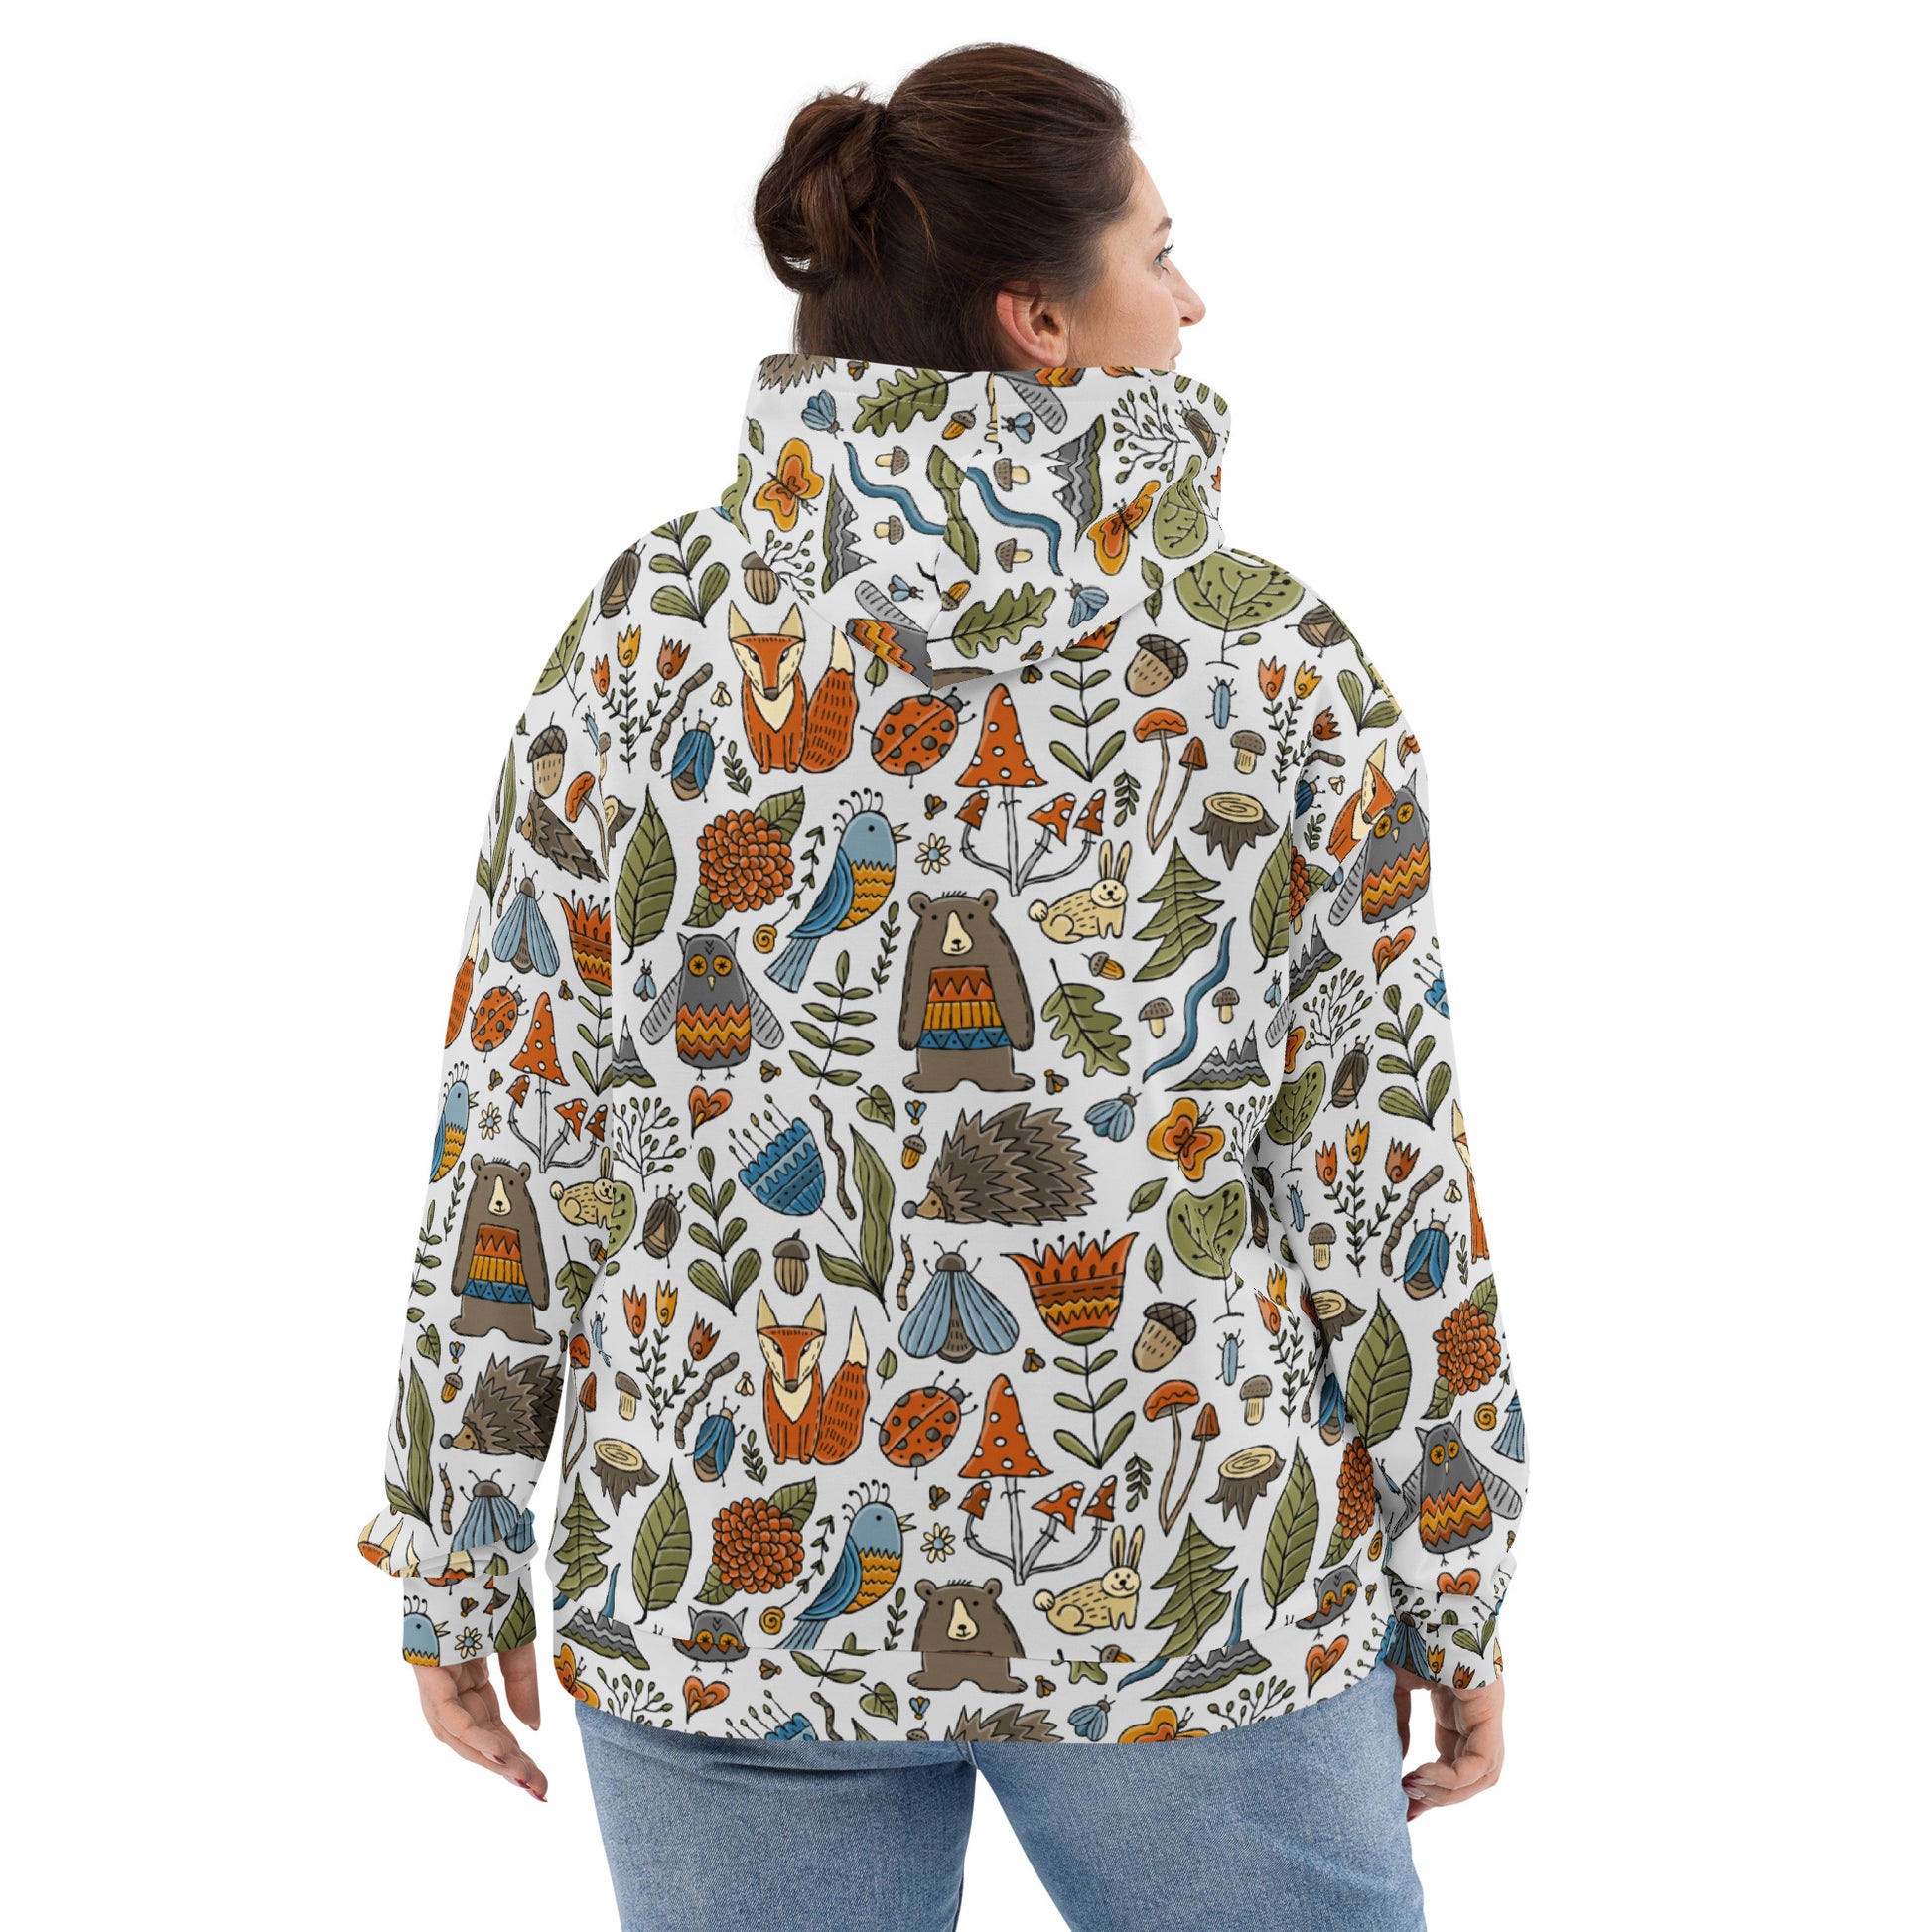 Woman wear in Artistic Designer Hoodie all over print vintage style with magic world illustration of forest - animals and birds flowers and nature bear fox owls butterflies hedgehog insects mashrooms and trees. Festival comfortable stylish wear trendy fashionable rare beautiful unique. Big size, back side. Kudry